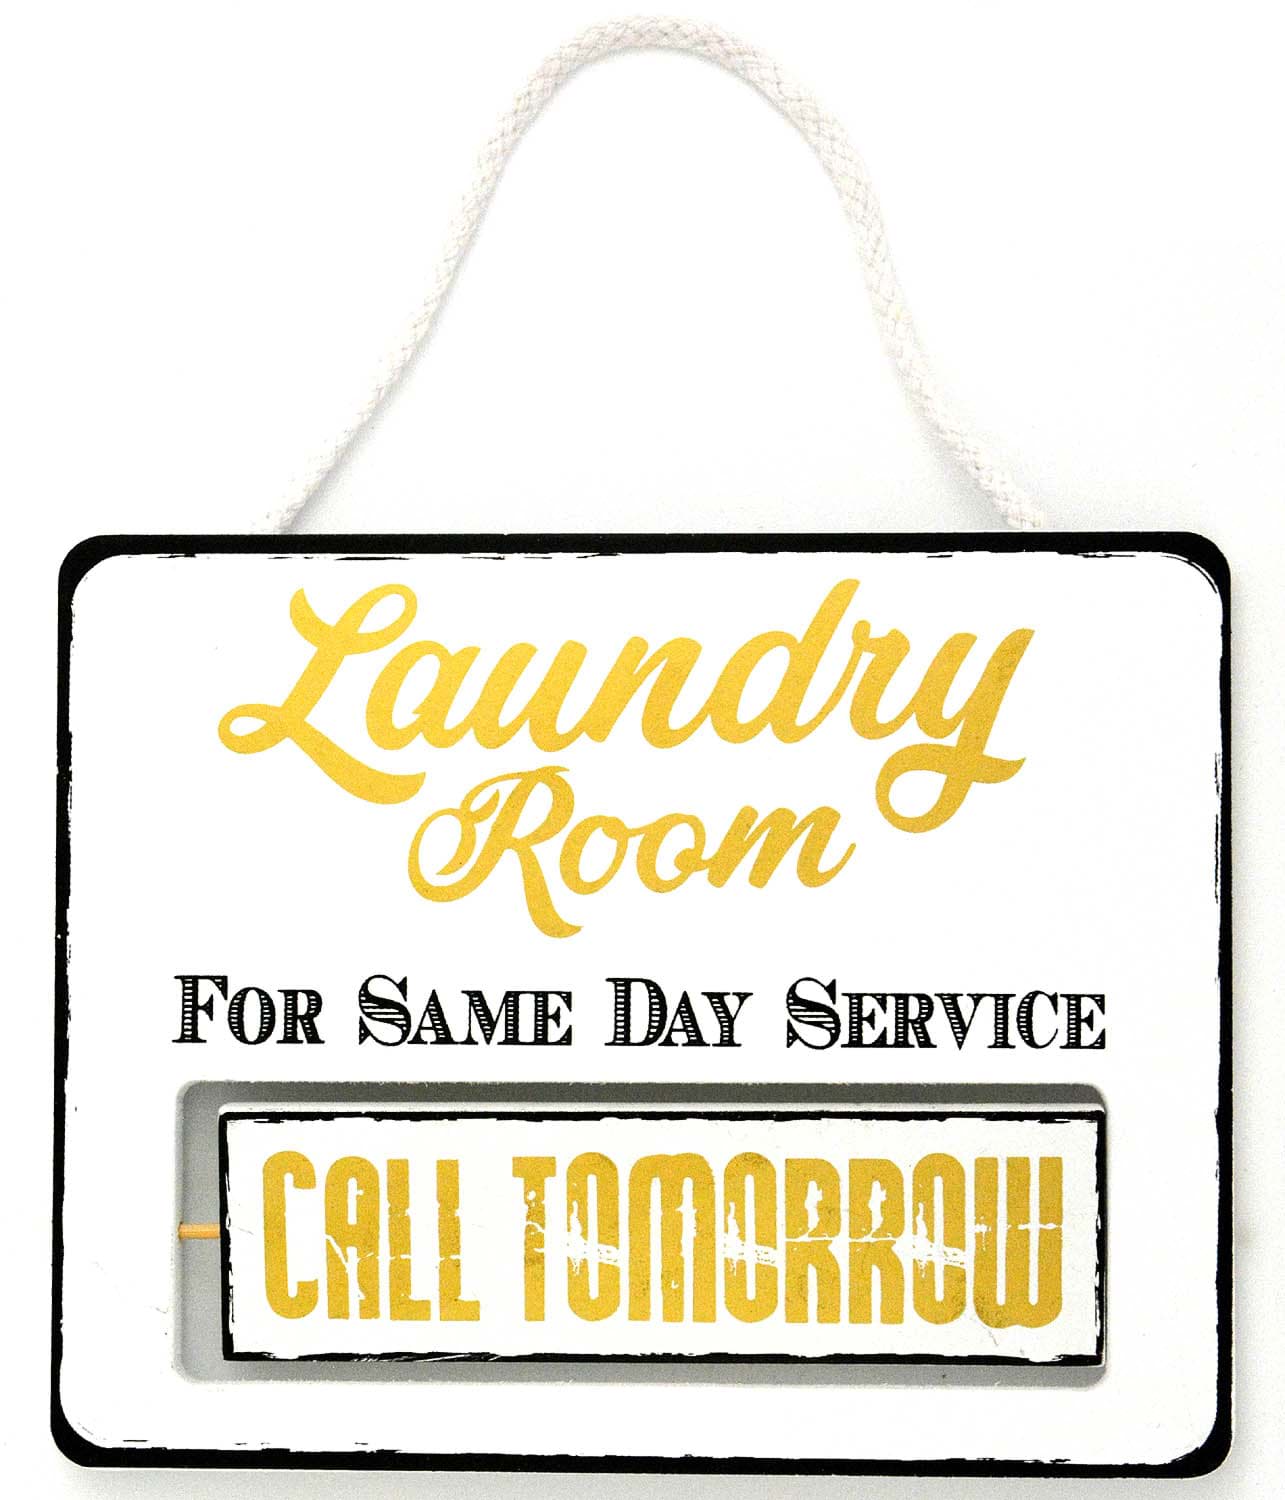 Picture of Rotating Sign "Laundry Room", approx. 20cm x 16cm